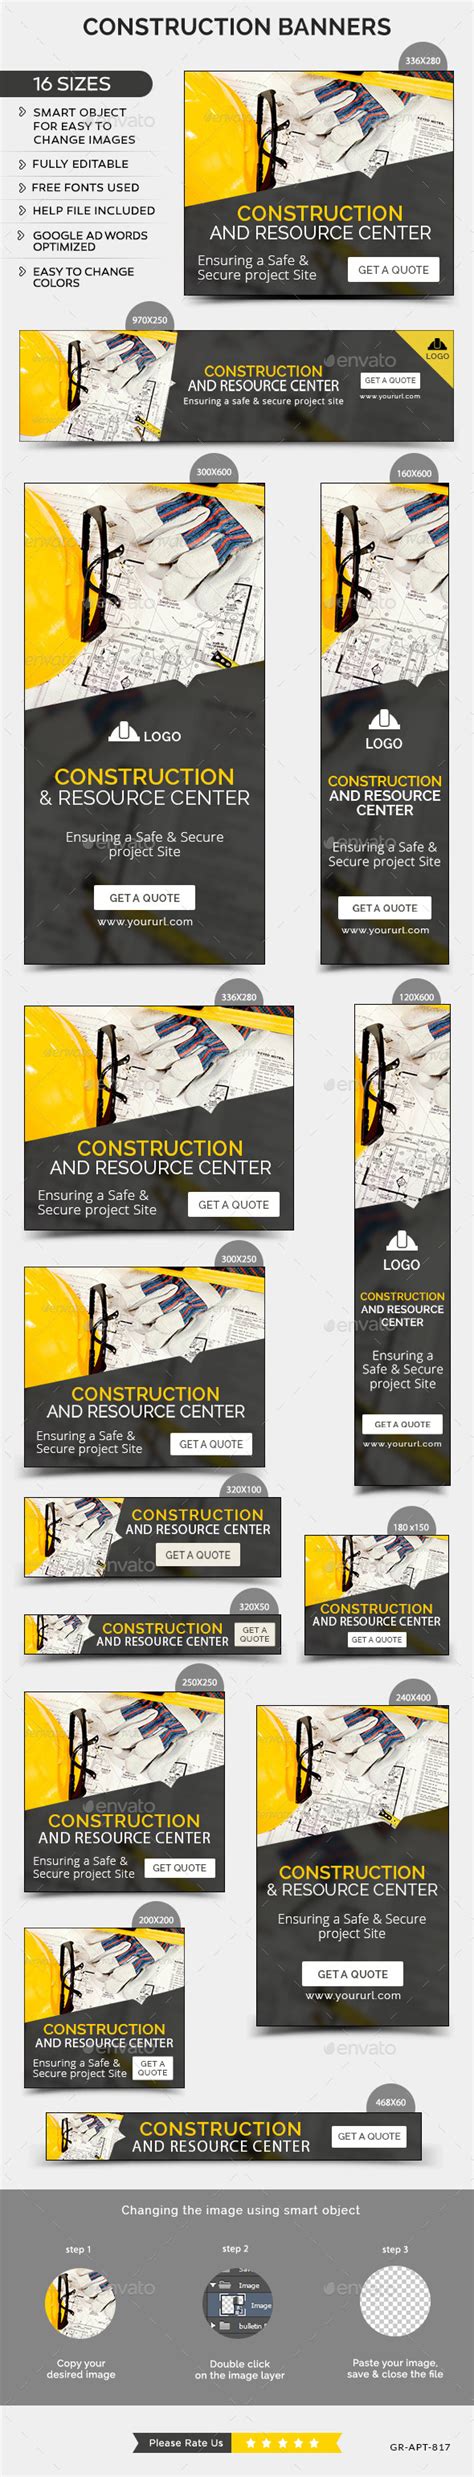 Construction Banners Banner Adwords Banner Animated Banners